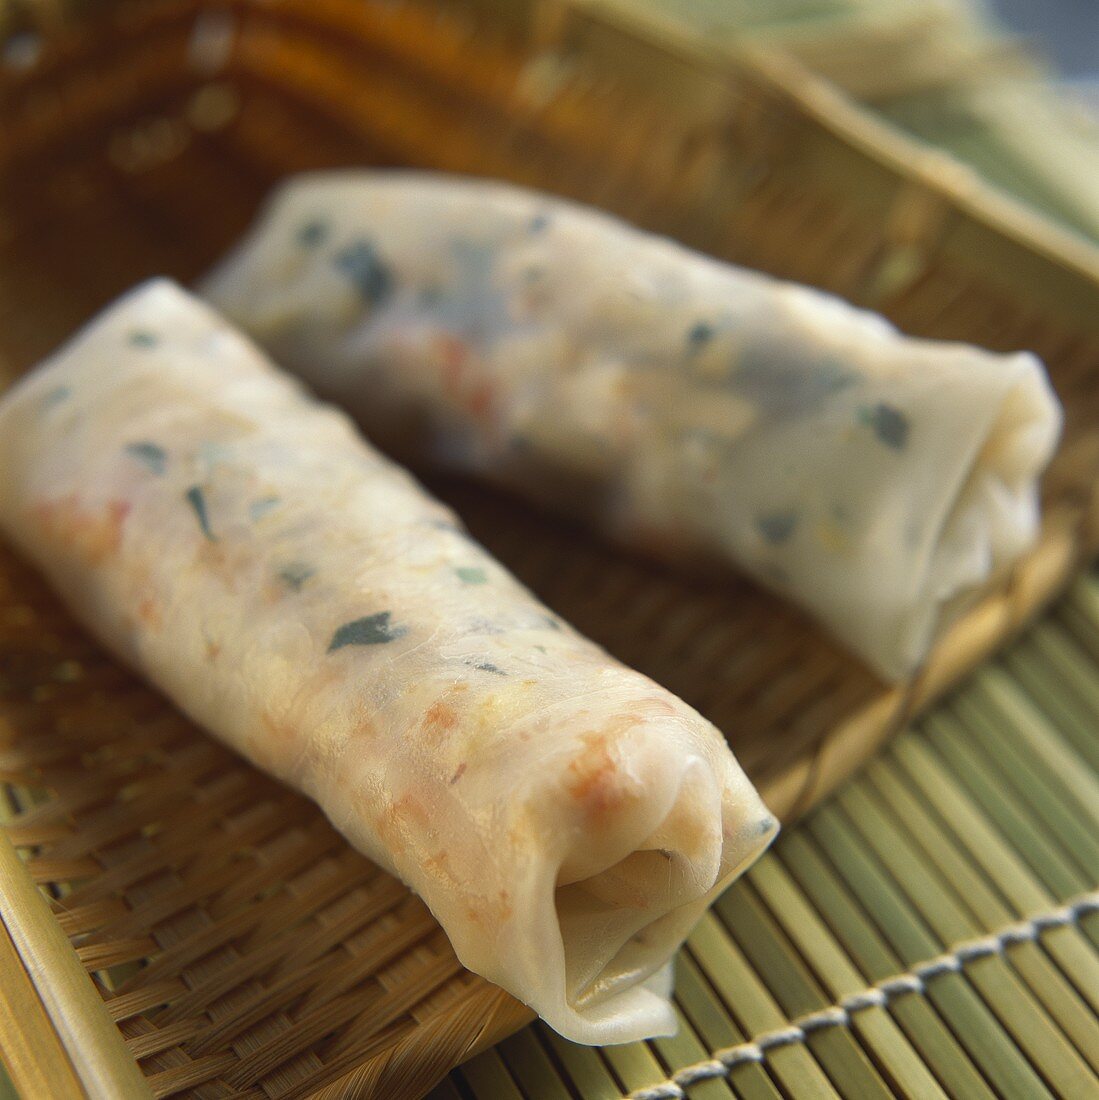 Two spring rolls (rice paper filled with vegetables, Asia)